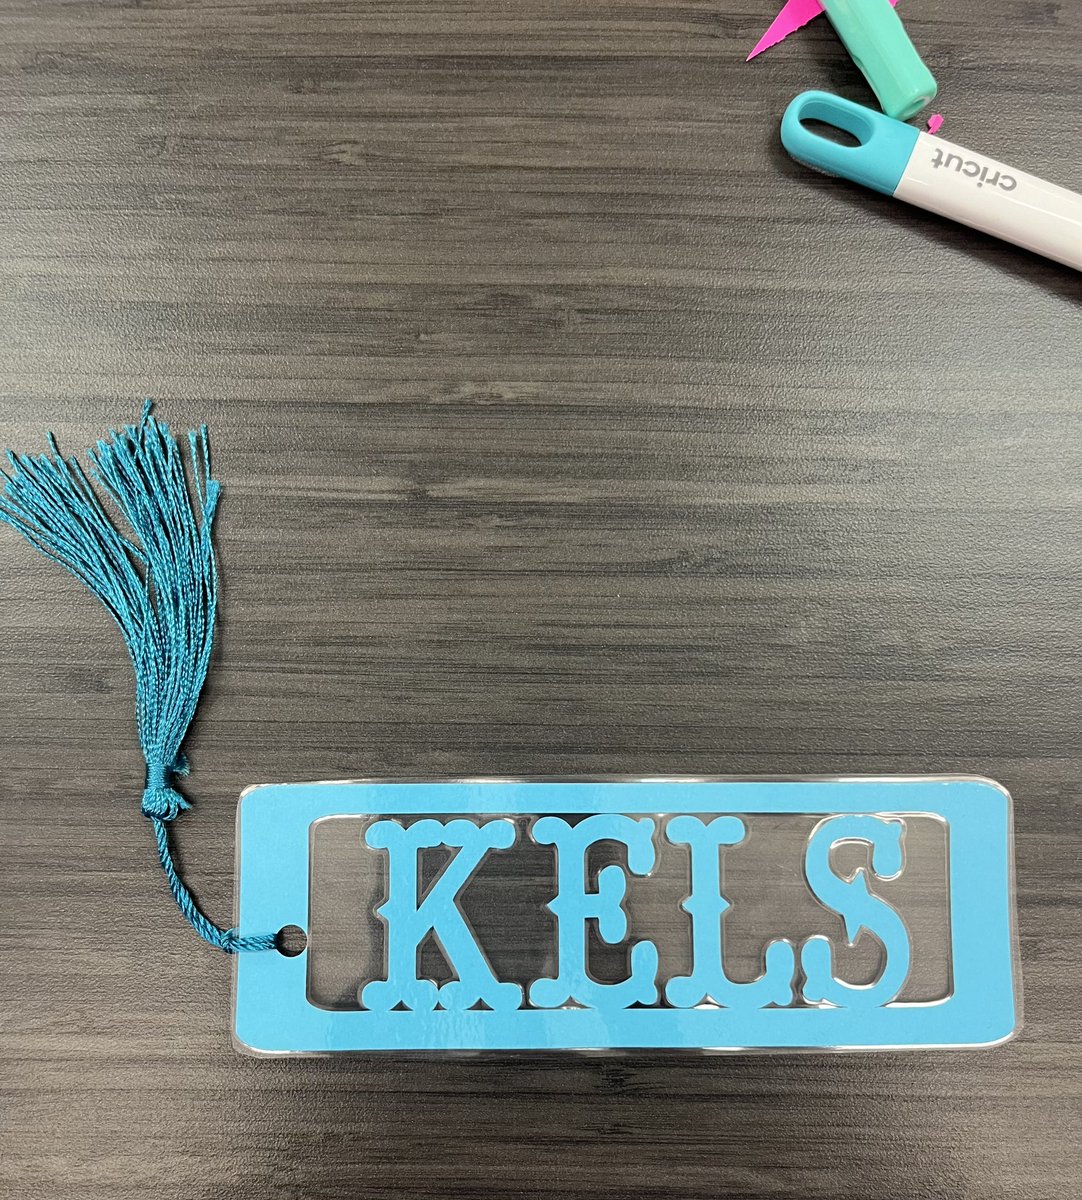 We made bookmarks for Day 2 of my @cricut class! I love watching my colleagues get excited about their creations😍 @rvaruolo